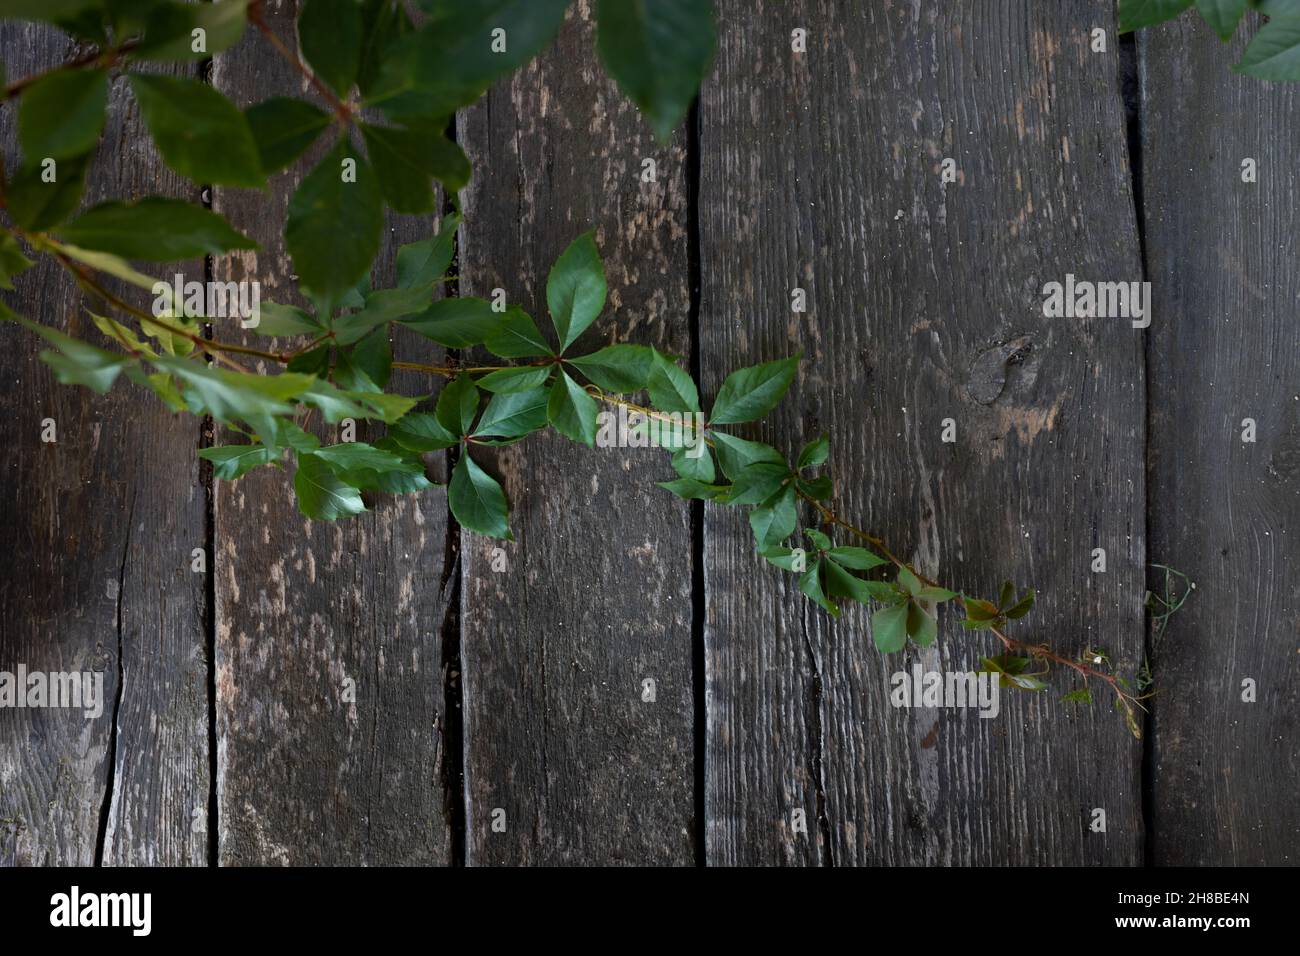 A green plant on a dark wooden background. Vine, ivy. Flat lay. Top view. Stock Photo